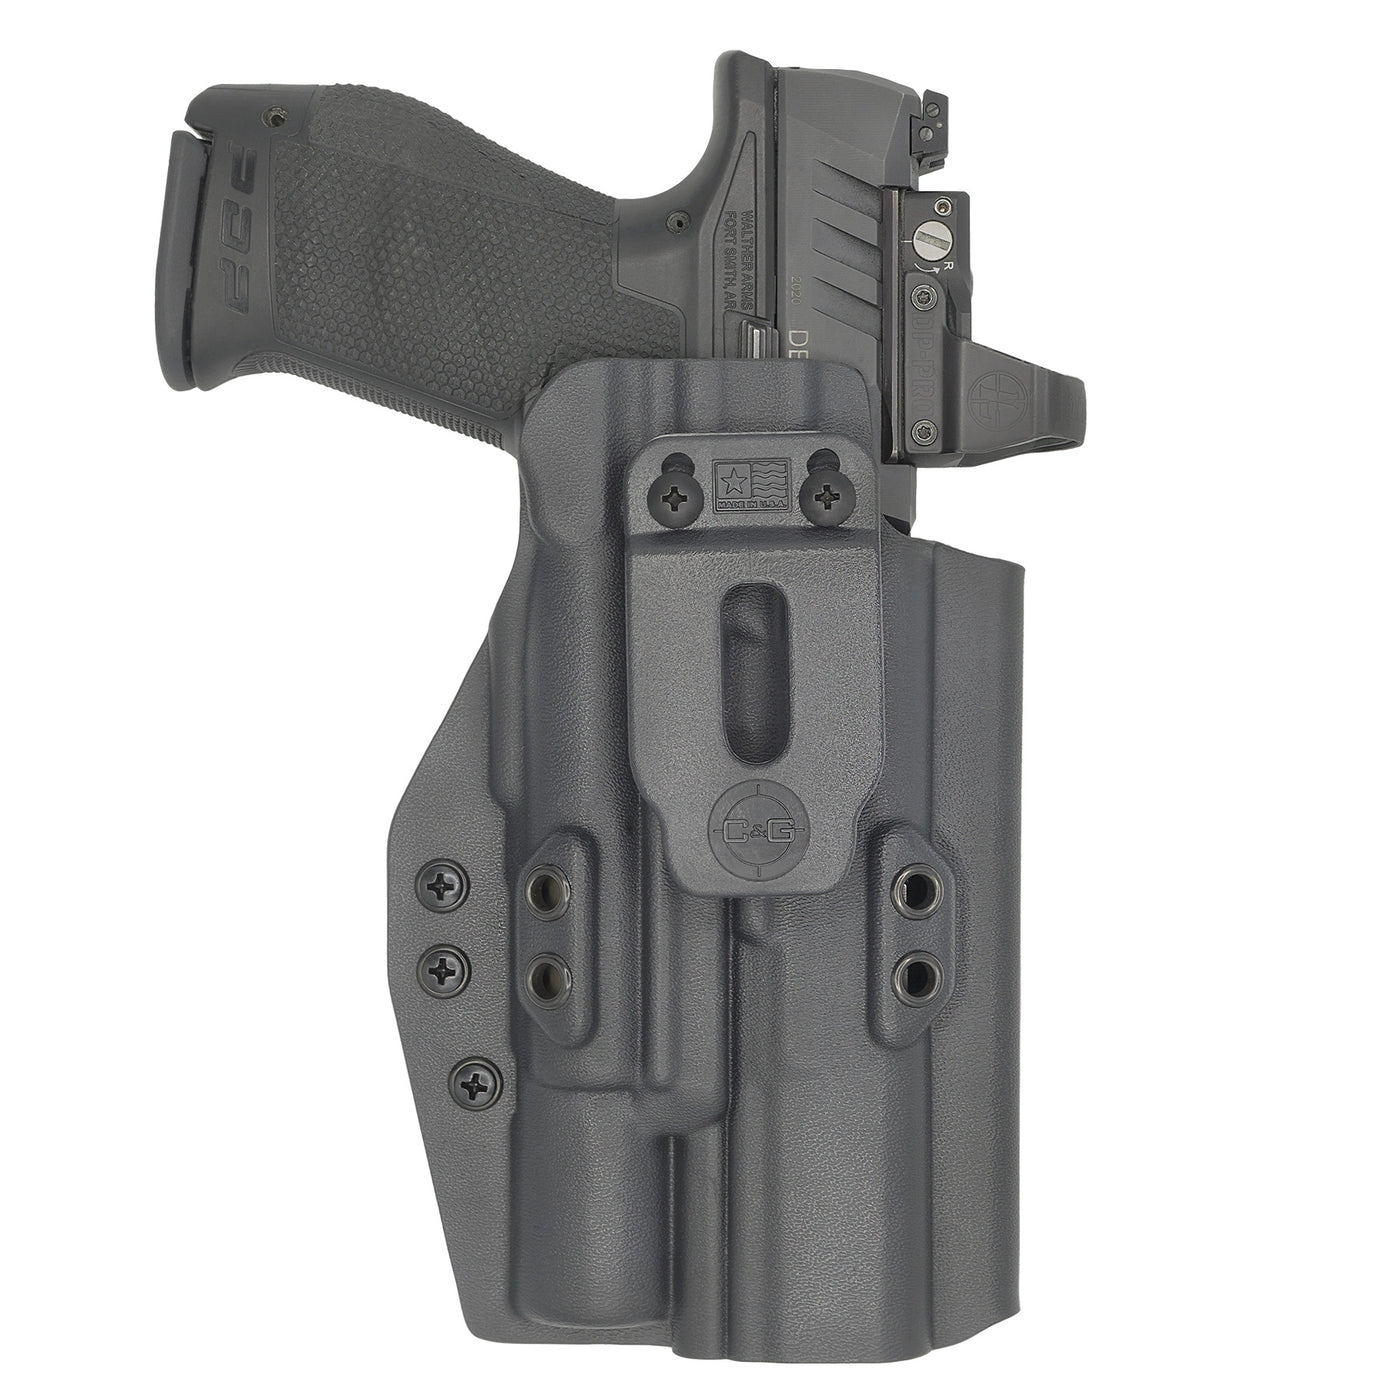 C&G Holsters custom IWB Tactical M&P 10/45 Surefire X300 in holstered position